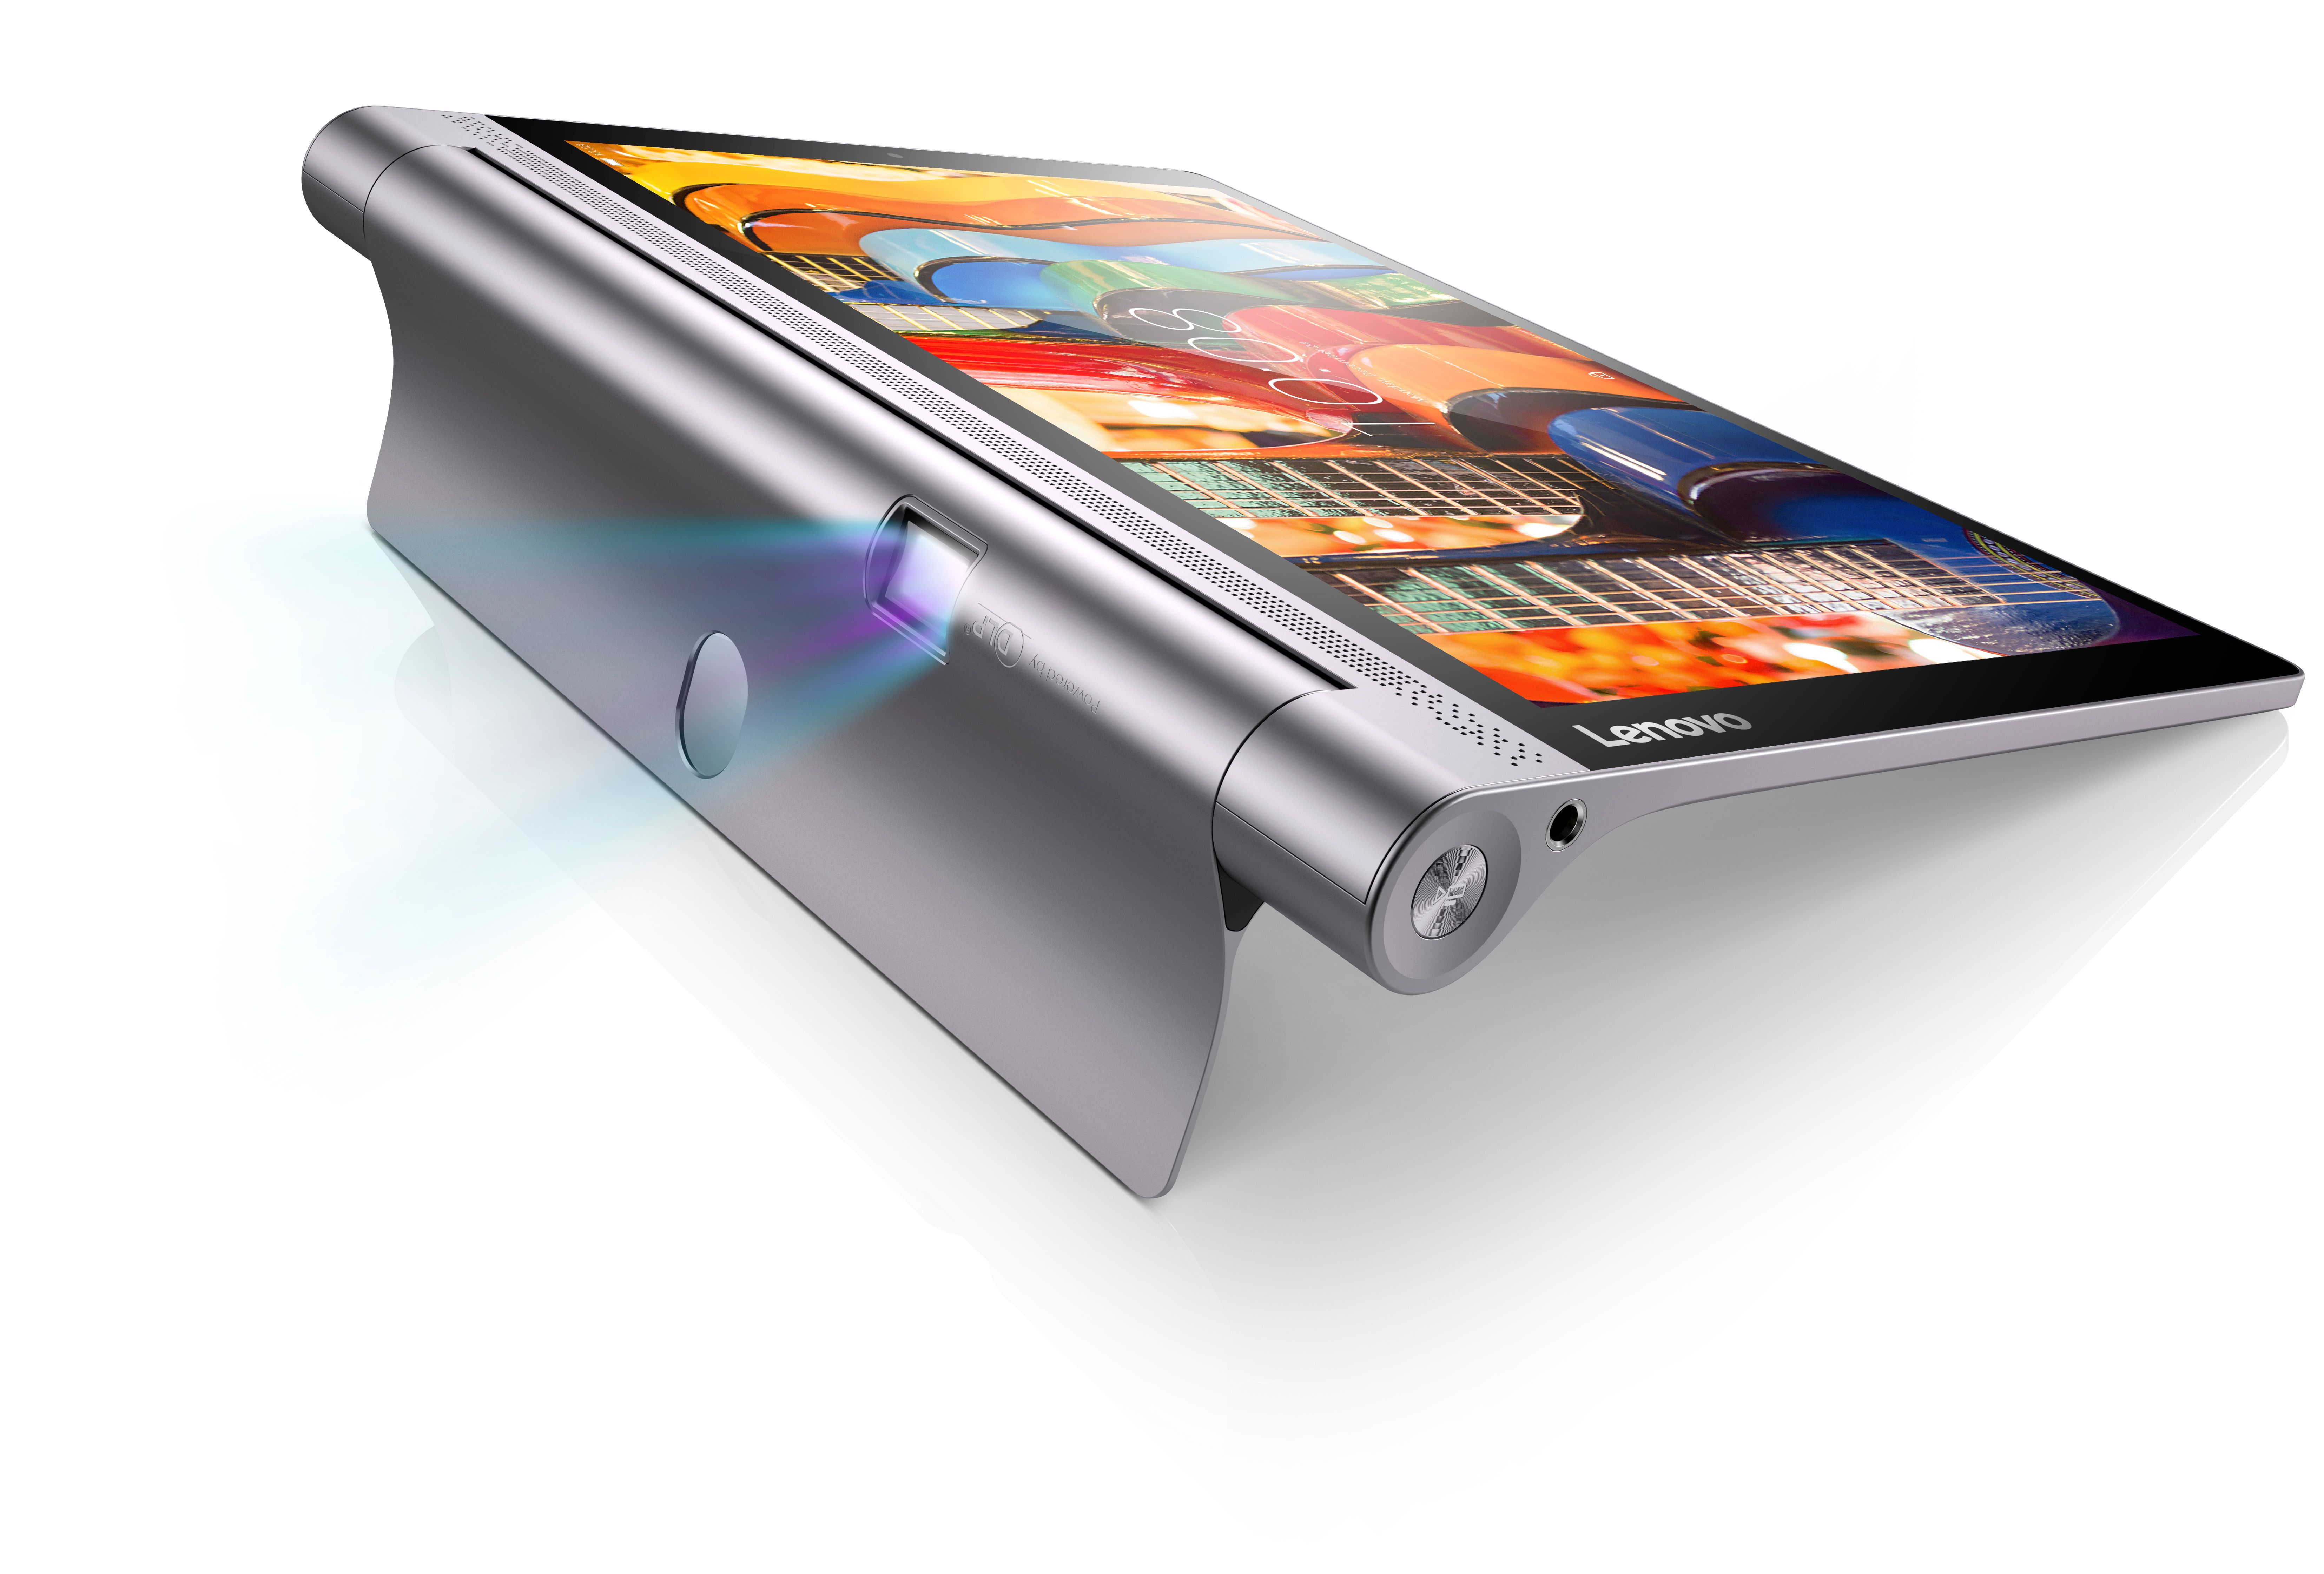 lenovo s yoga tab line adds new tab 3 and tab 3 pro android tablets image 1